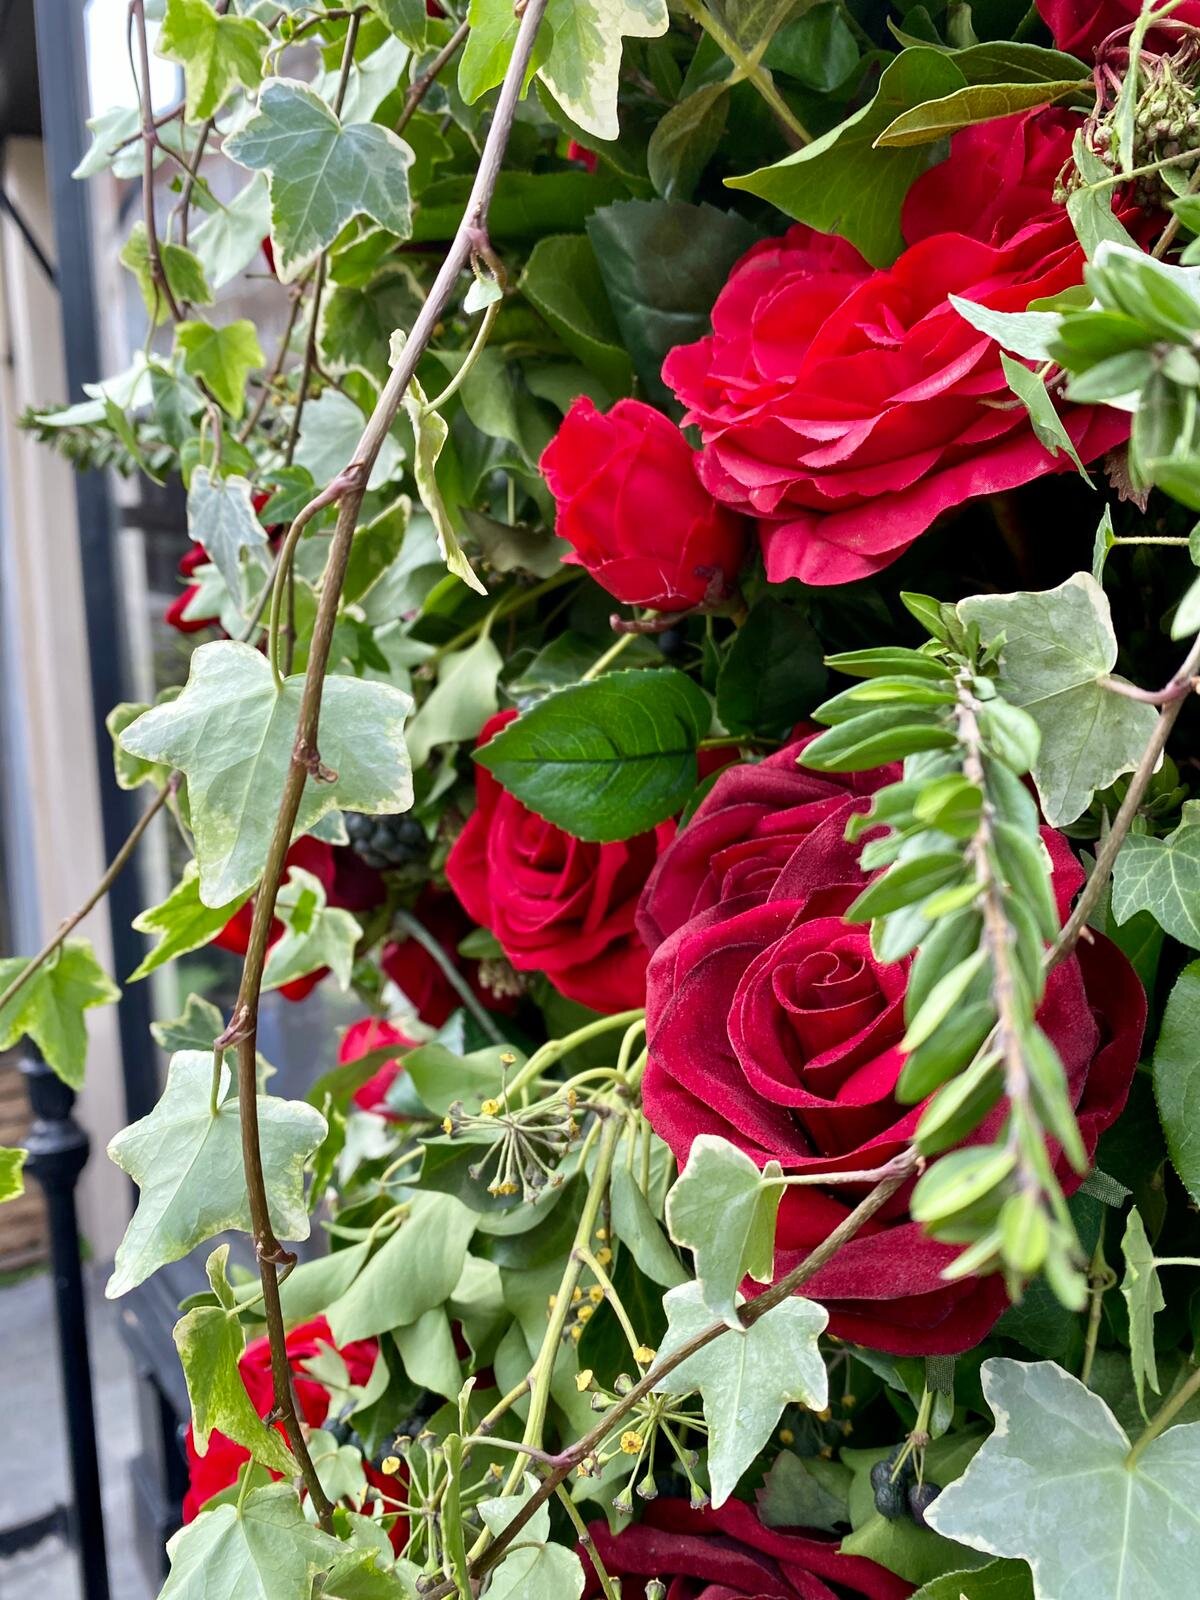 Neill Strain Floral Couture Introduces the New Collection of Valentine’s Day Flowers - red roses and hedera - on thursd